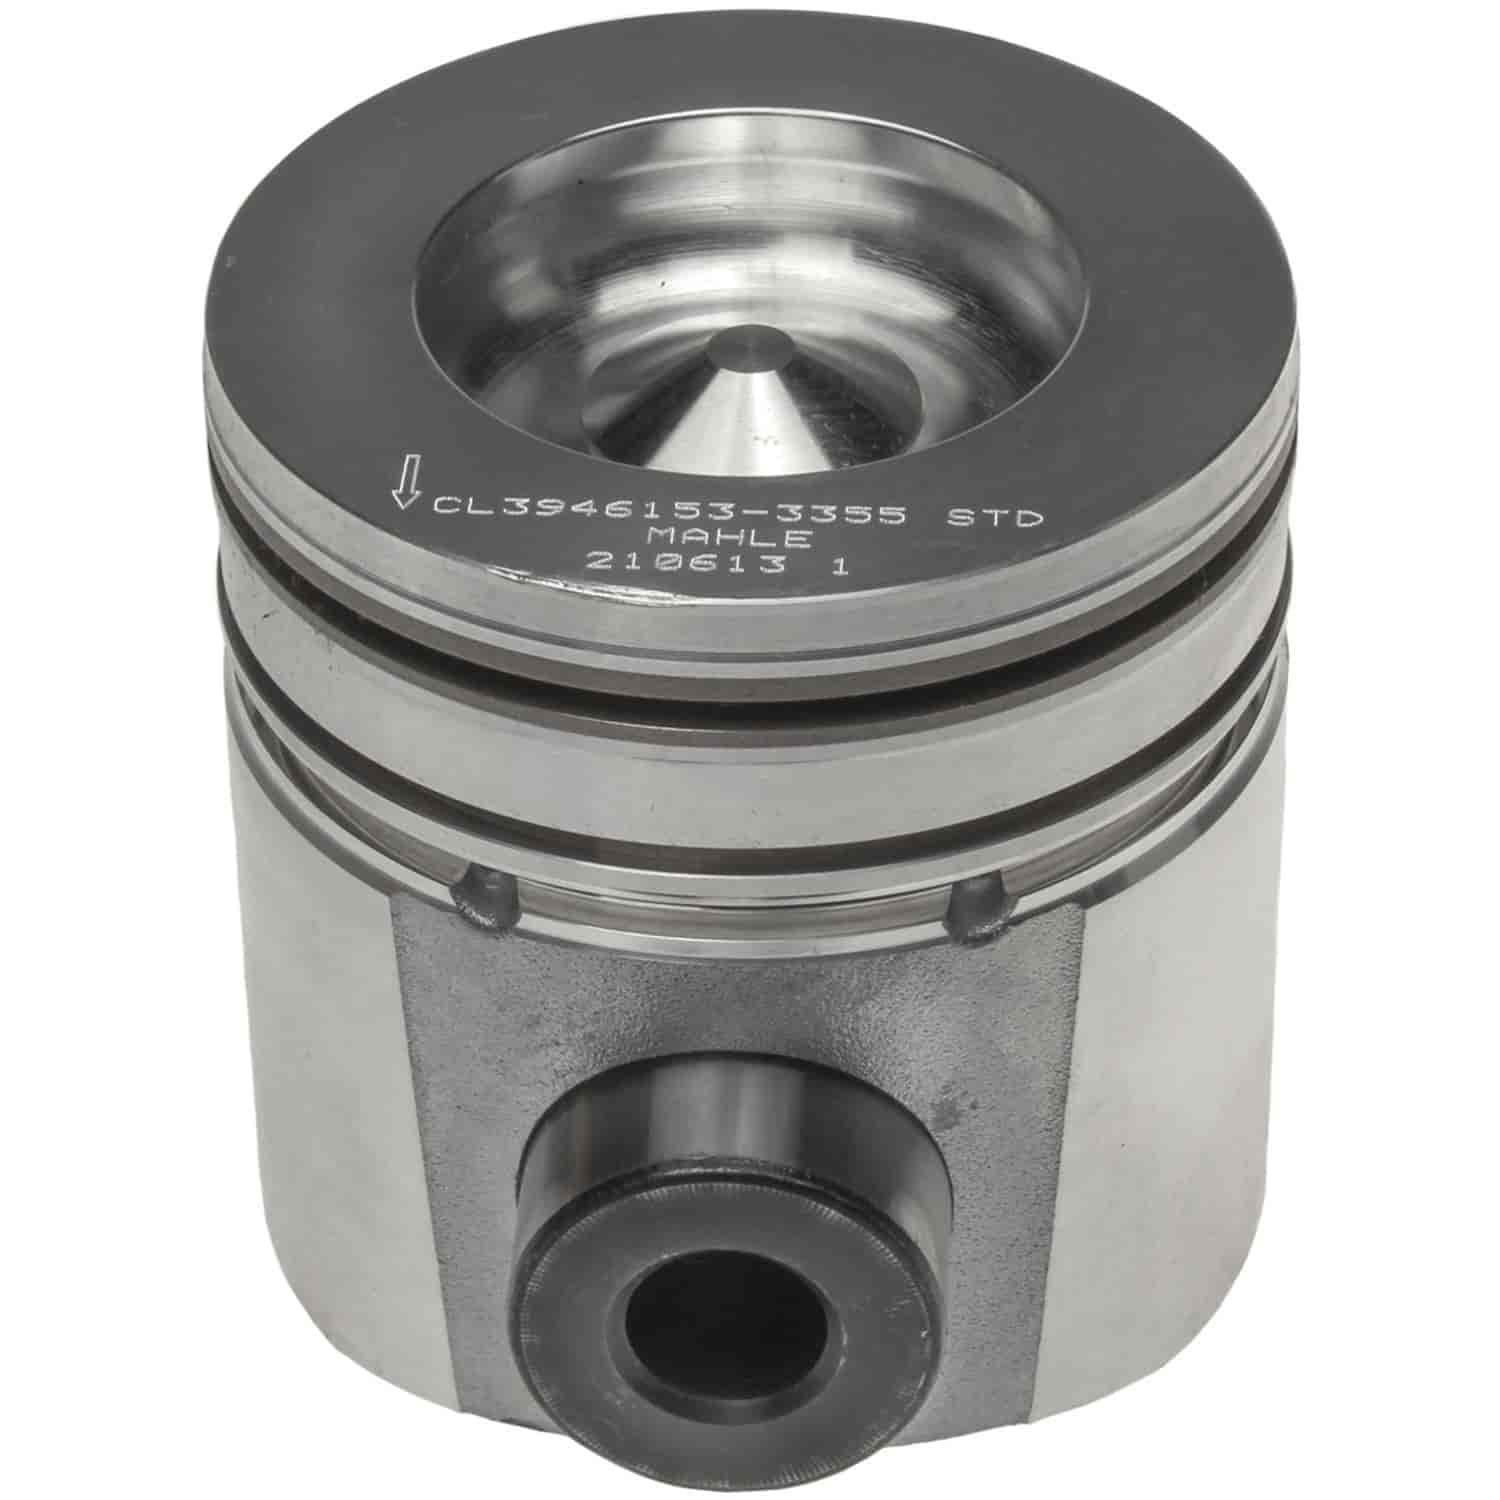 Piston and Rings Set 1998-2002 Dodge, Fits Cummins Diesel L6 5.9L with 4.016" Bore (Standard)